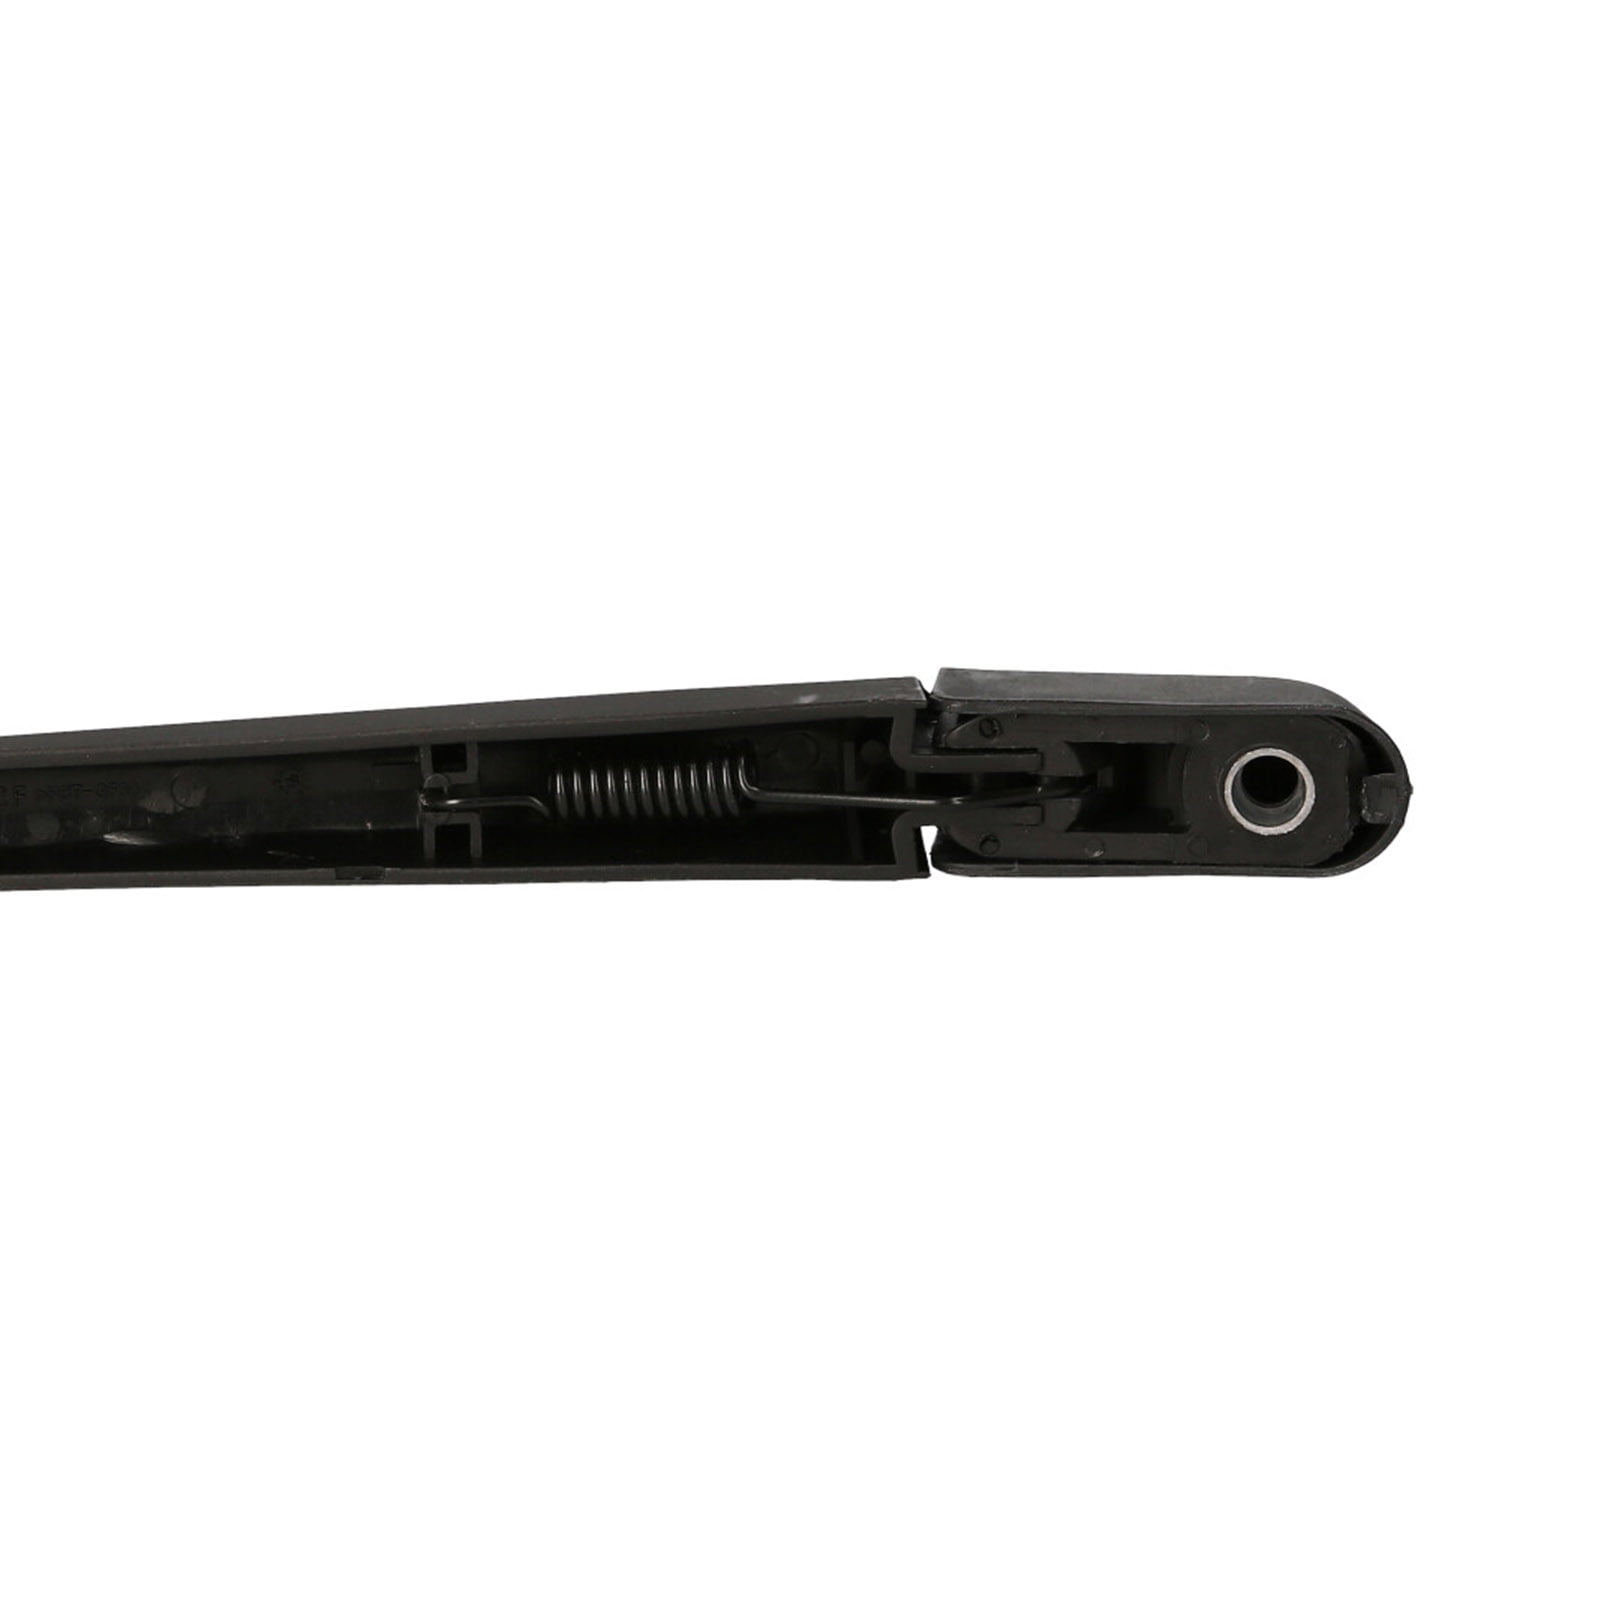 Carevas Rear Wiper Arm and Blade Replacement for Dodge Grand Caravan 2008-2010 Chrysler Town 2010 Dodge Grand Caravan Rear Wiper Blade Replacement